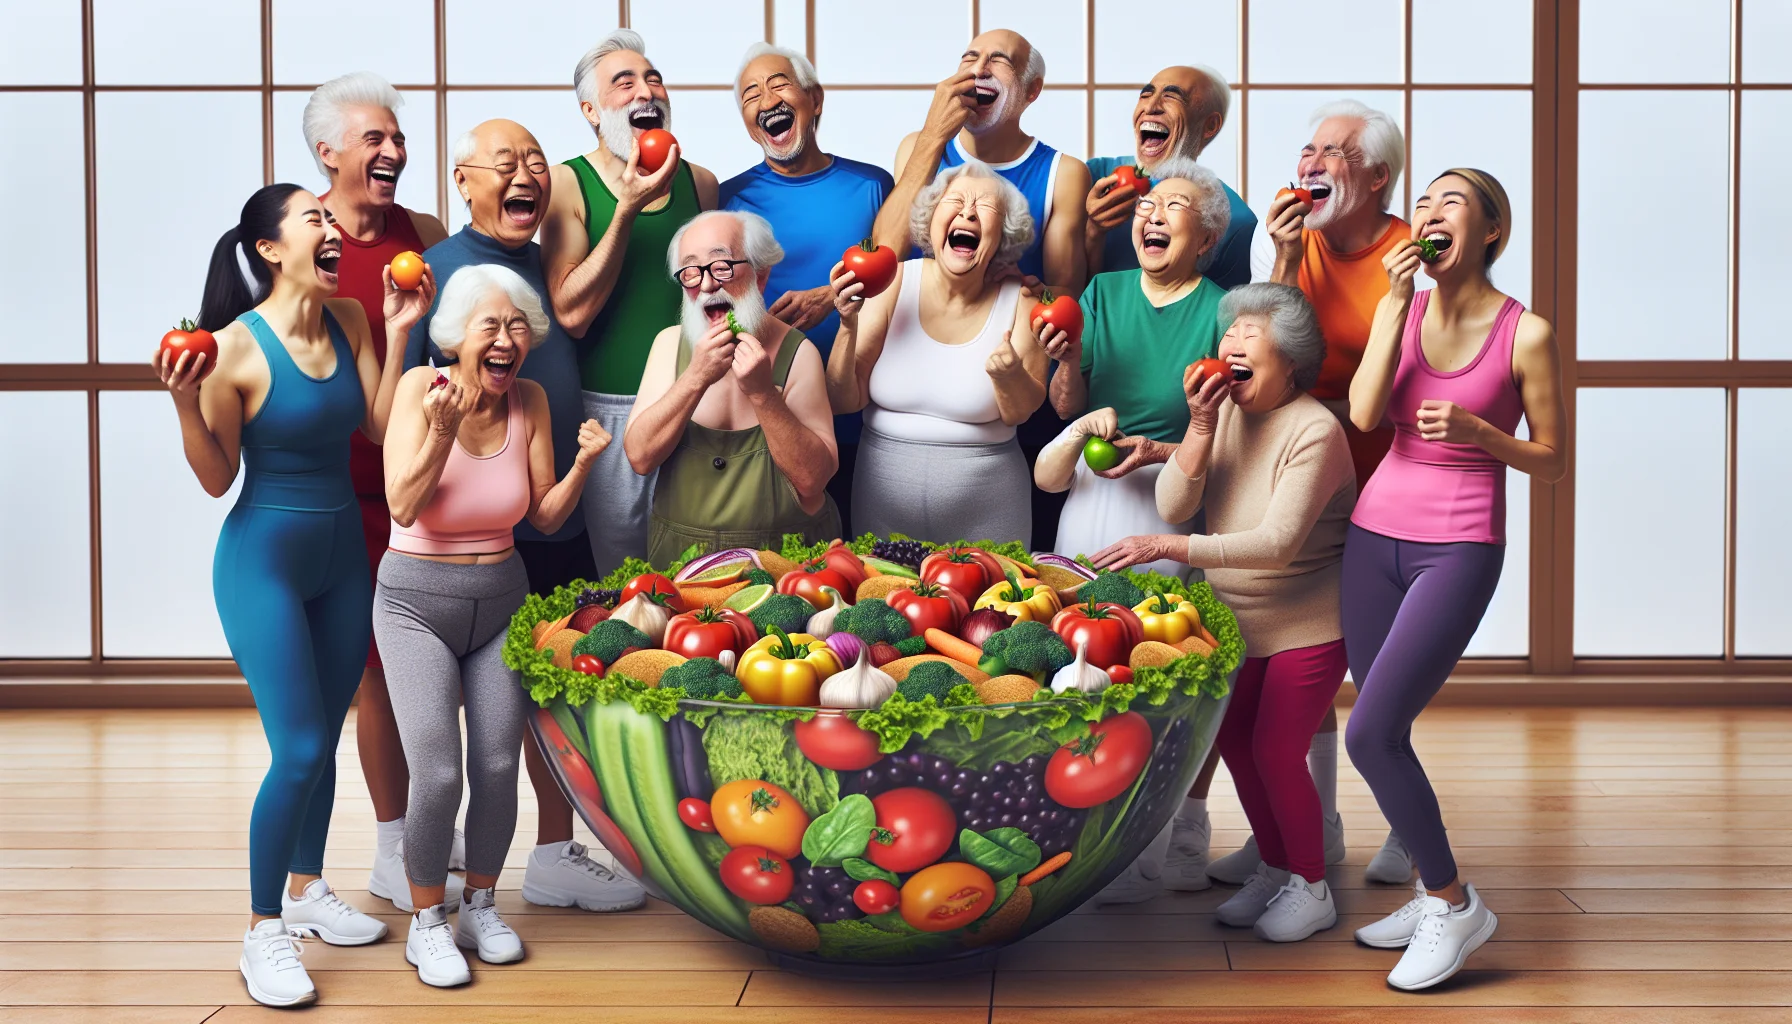 Imagine a comical, lifelike scene centered around heart-healthy eating for older adults with peripheral artery disease. Picture a community center filled with a diverse group of elderly individuals, each person of different descent such as Caucasian, Black, and Hispanic. They are gathered around a gigantic salad bowl, laughing heartily, dressed in colorful gym outfits. There's a South Asian woman trying to balance a tomato on her nose, and a Middle Eastern man has a spinach leaf stuck in his beard. Each of them is holding various heart-healthy foods like whole grains, fruits, and vegetables, signifying a fun commitment to healthy eating without forgetting the importance of having a good laugh.